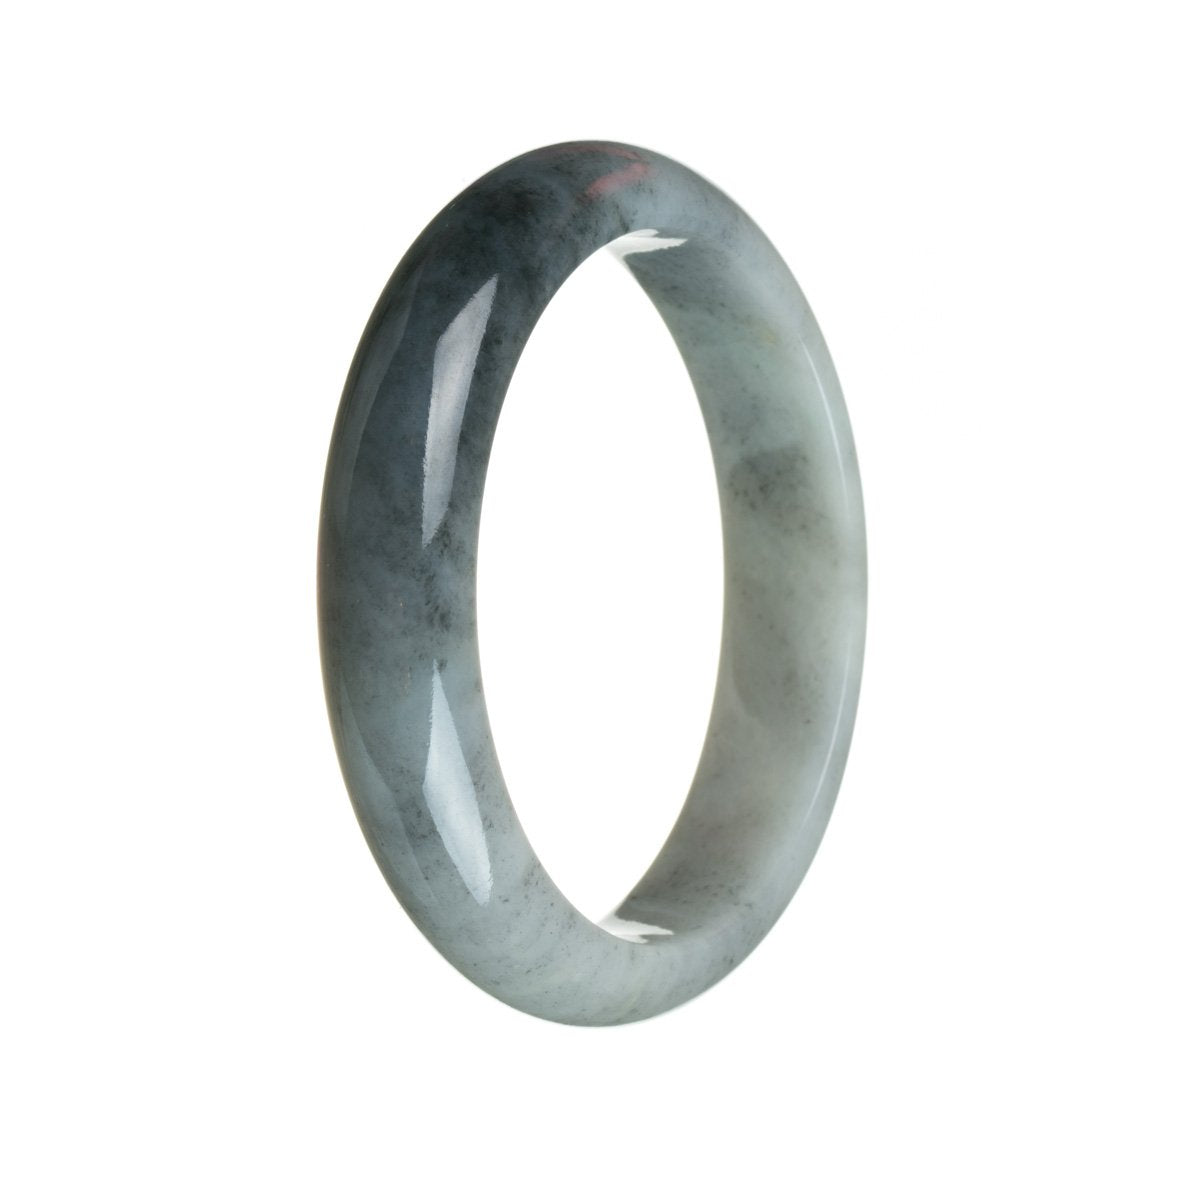 A half moon-shaped Burma Jade bangle with a genuine natural greyish white color, featuring black sections.